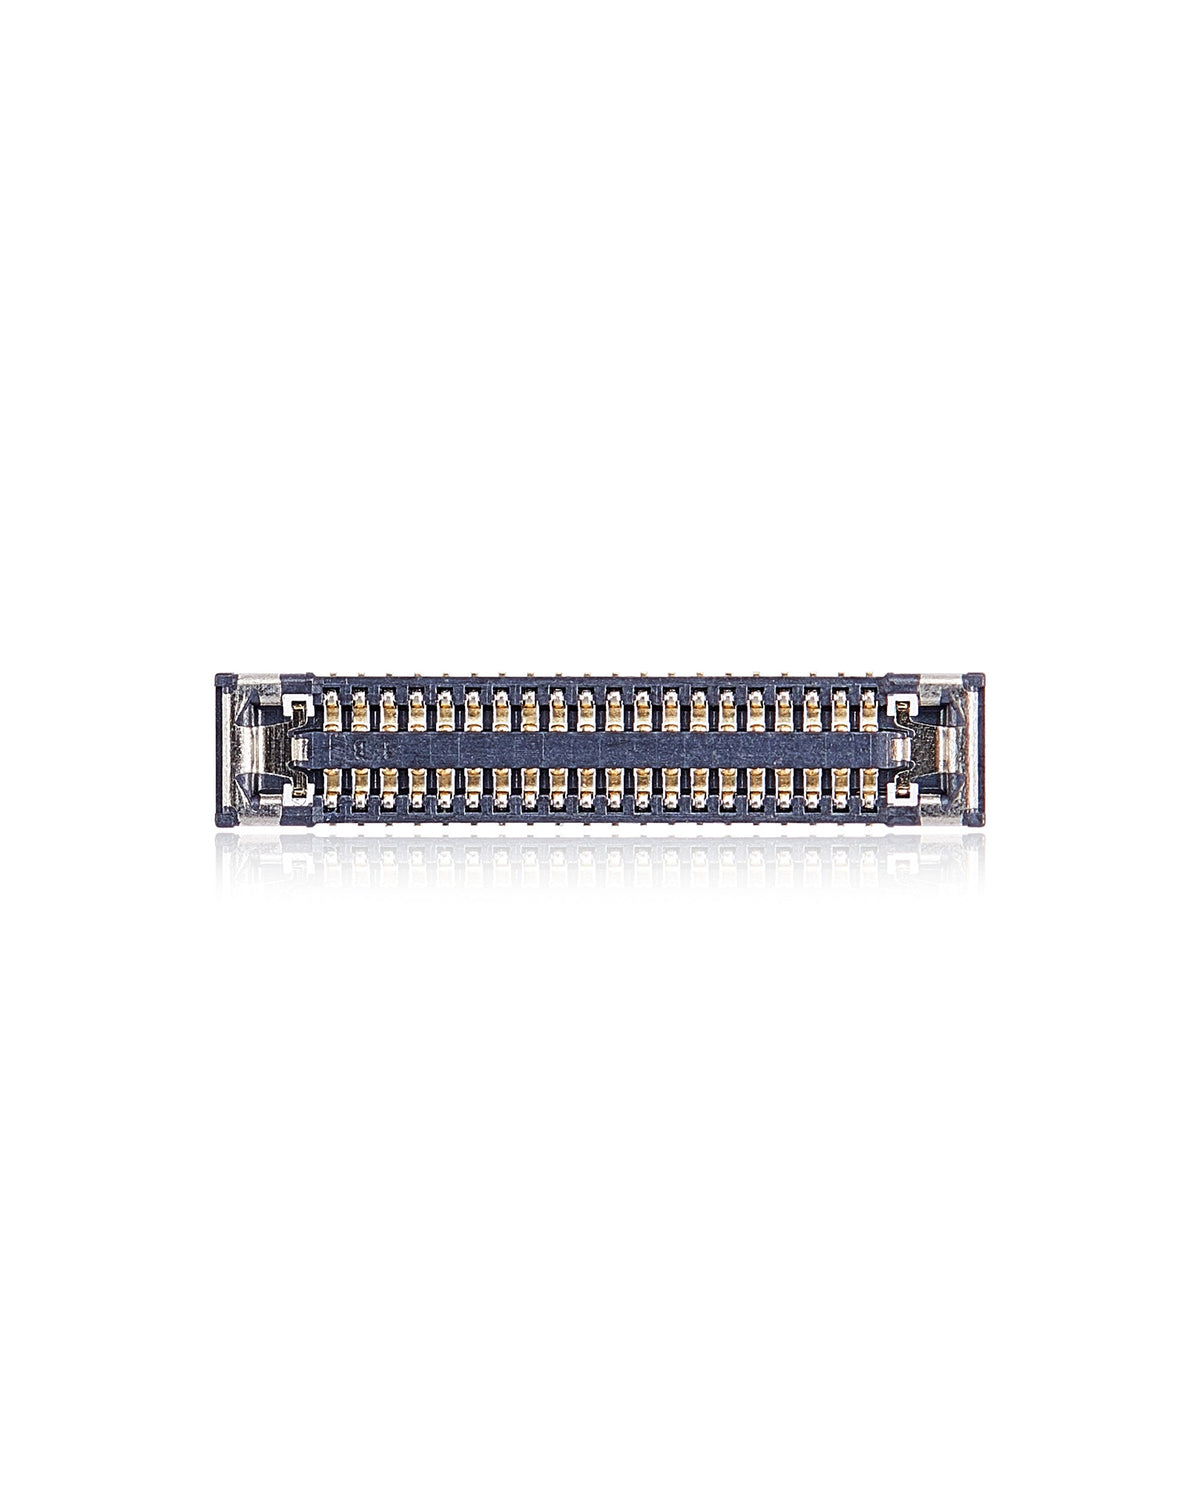 CHARGING FPC CONNECTOR ON LOGIC BOARD COMPATIBLE WITH IPHONE 12 / 12 PRO